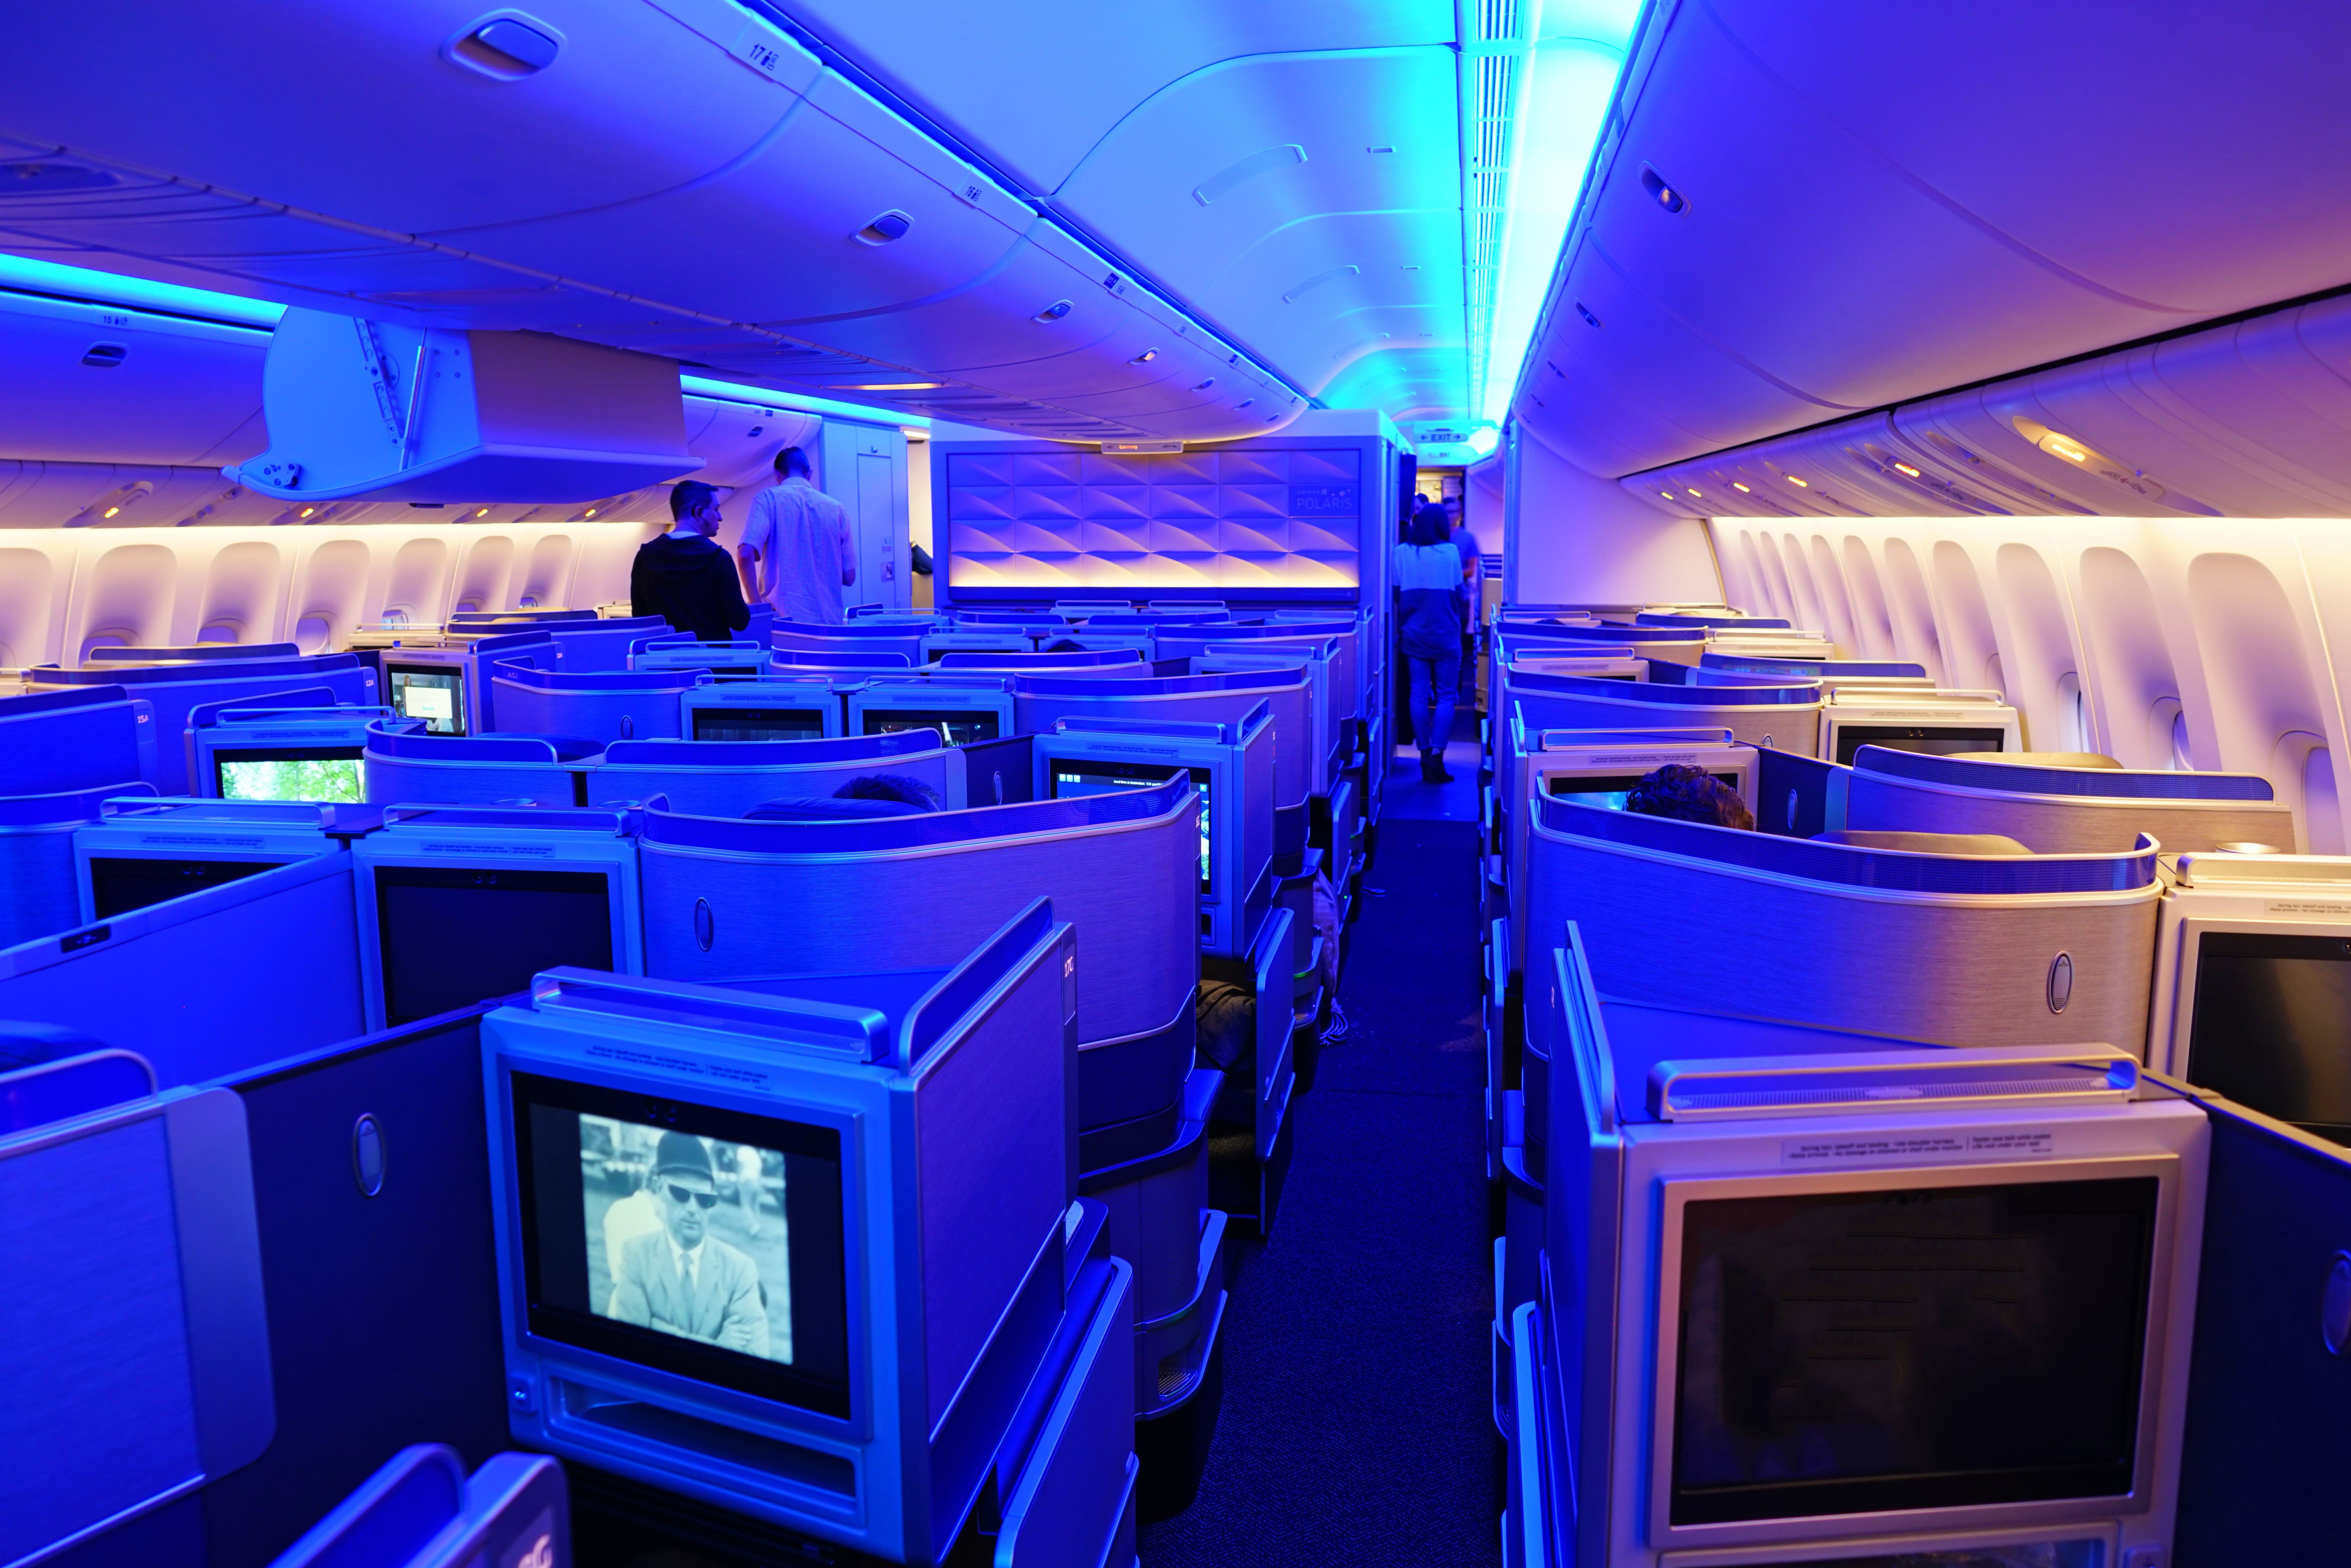 Inside the United Airlines Polaris Business Class cabin of a twin aisle aircraft.